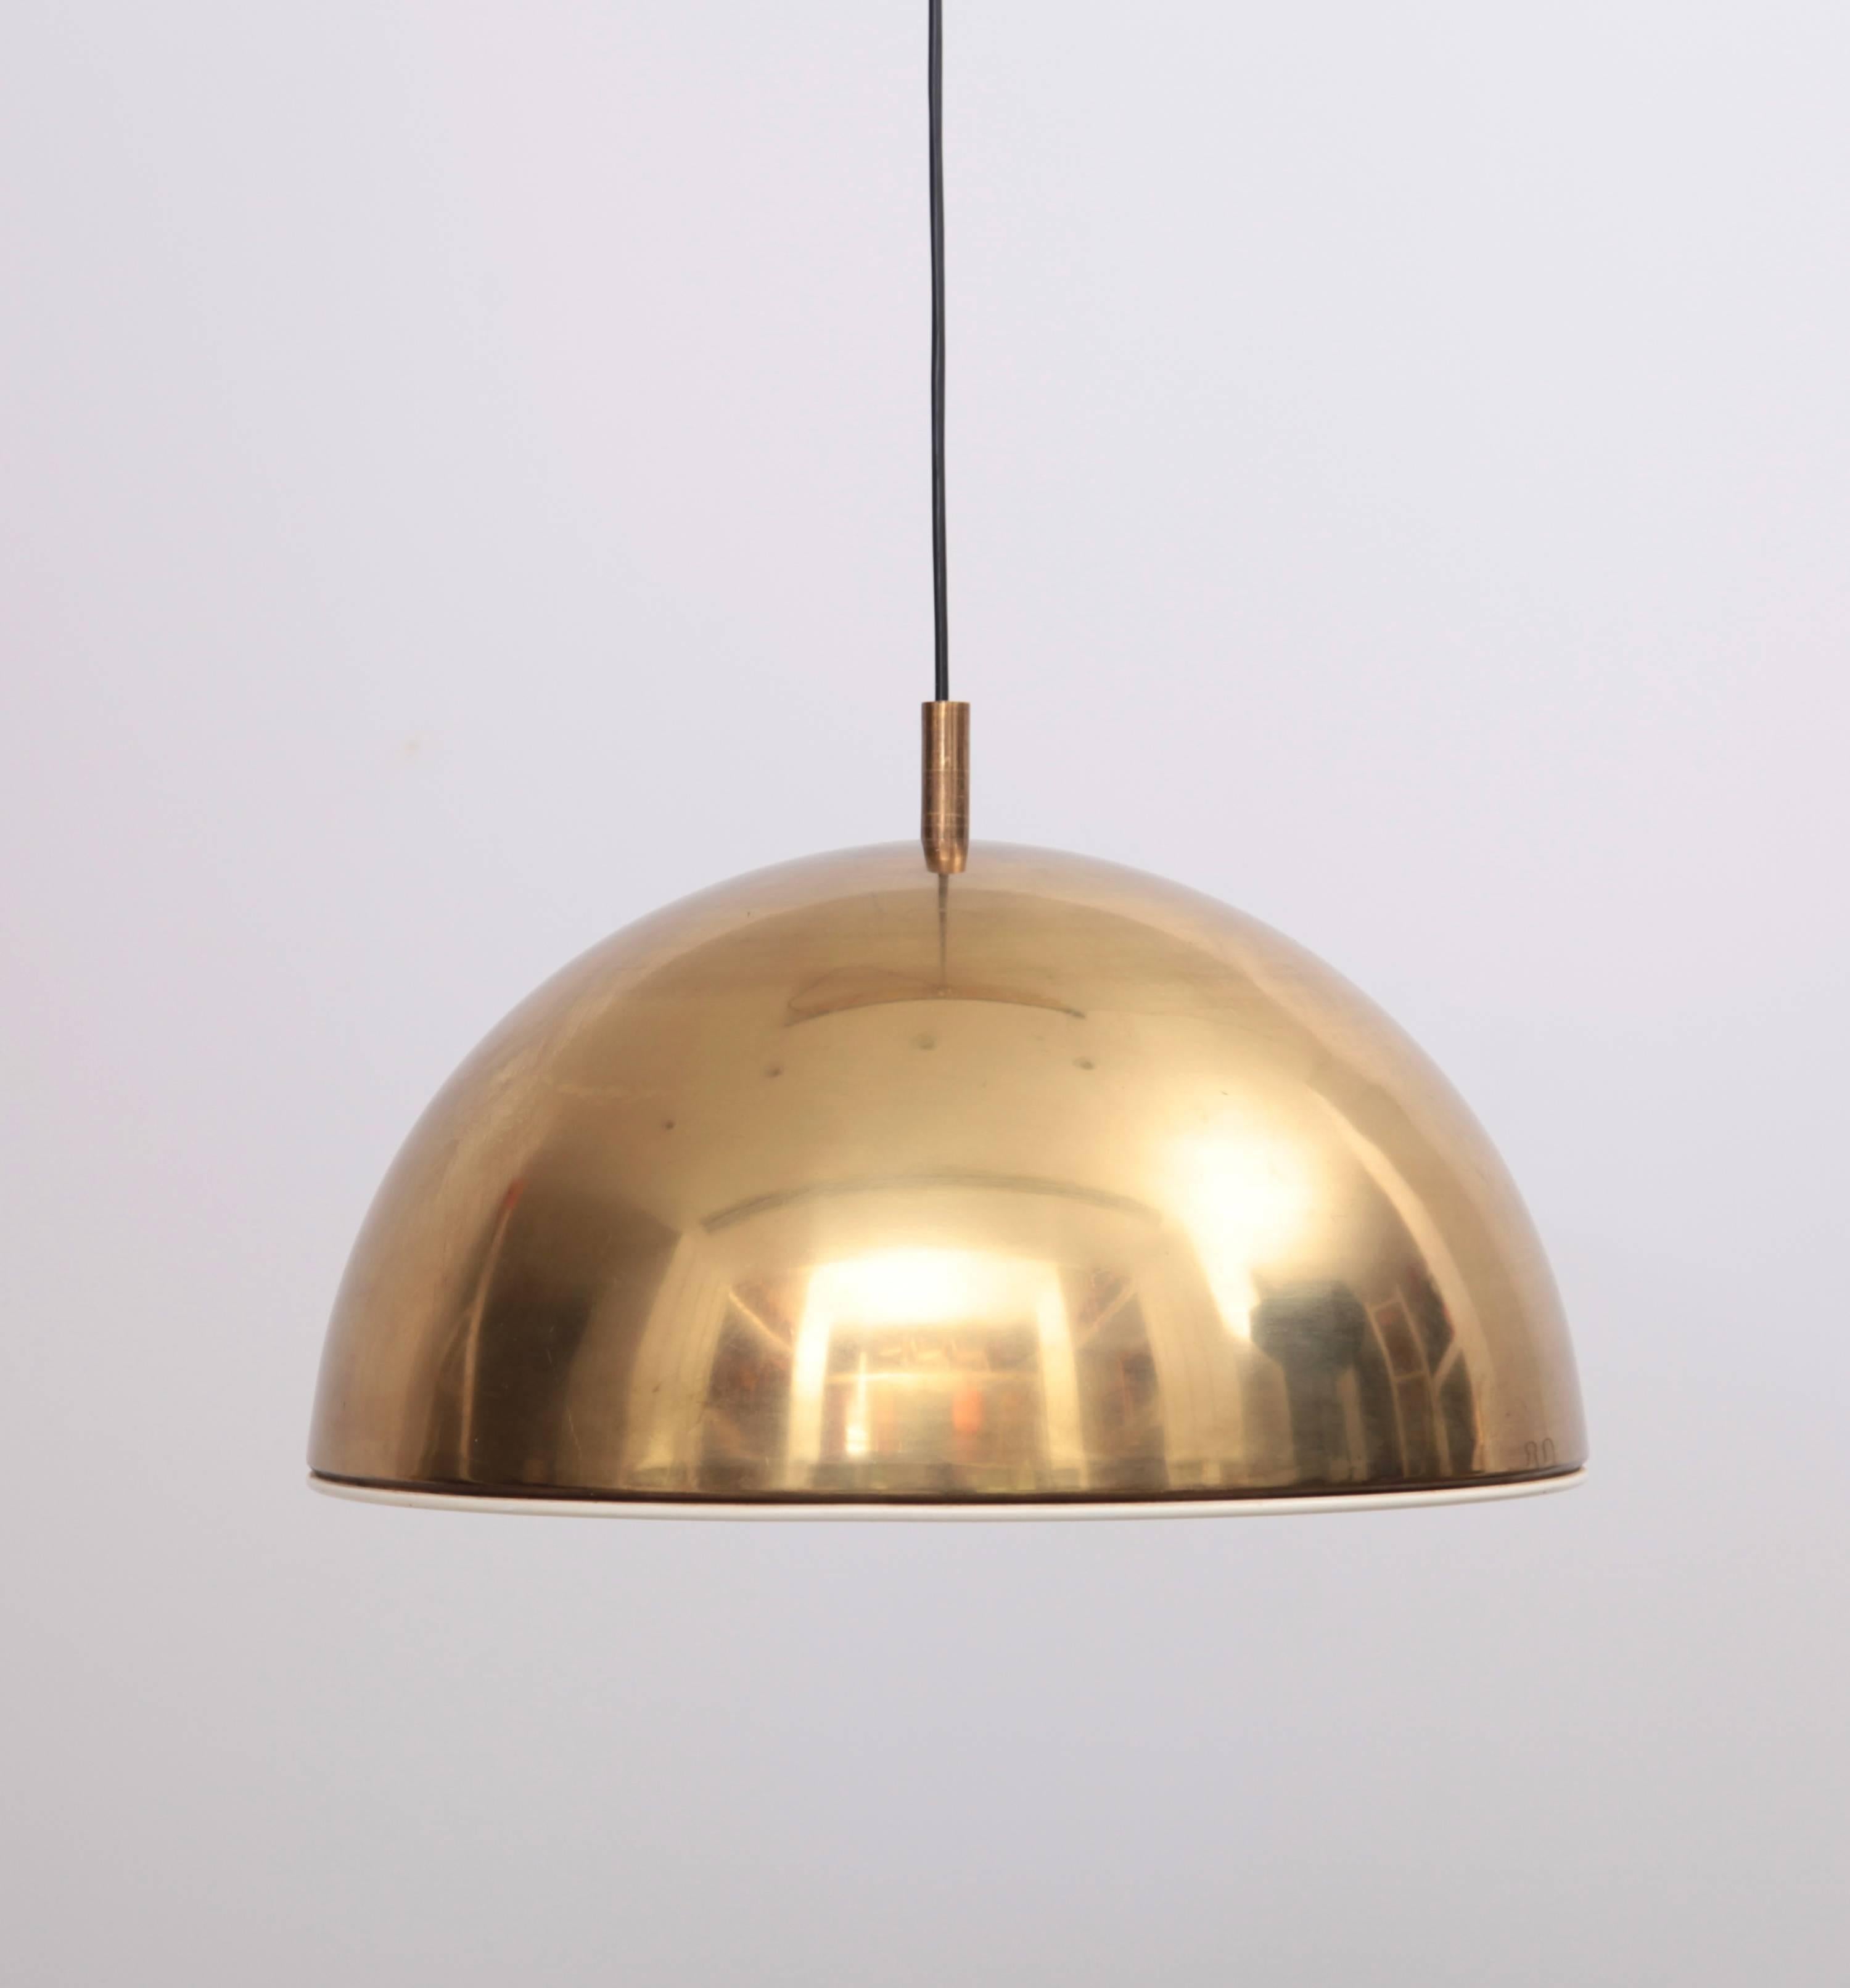 Heavy and high quality pendant lamp with a beautiful patina with no dents. One E27 / model A.